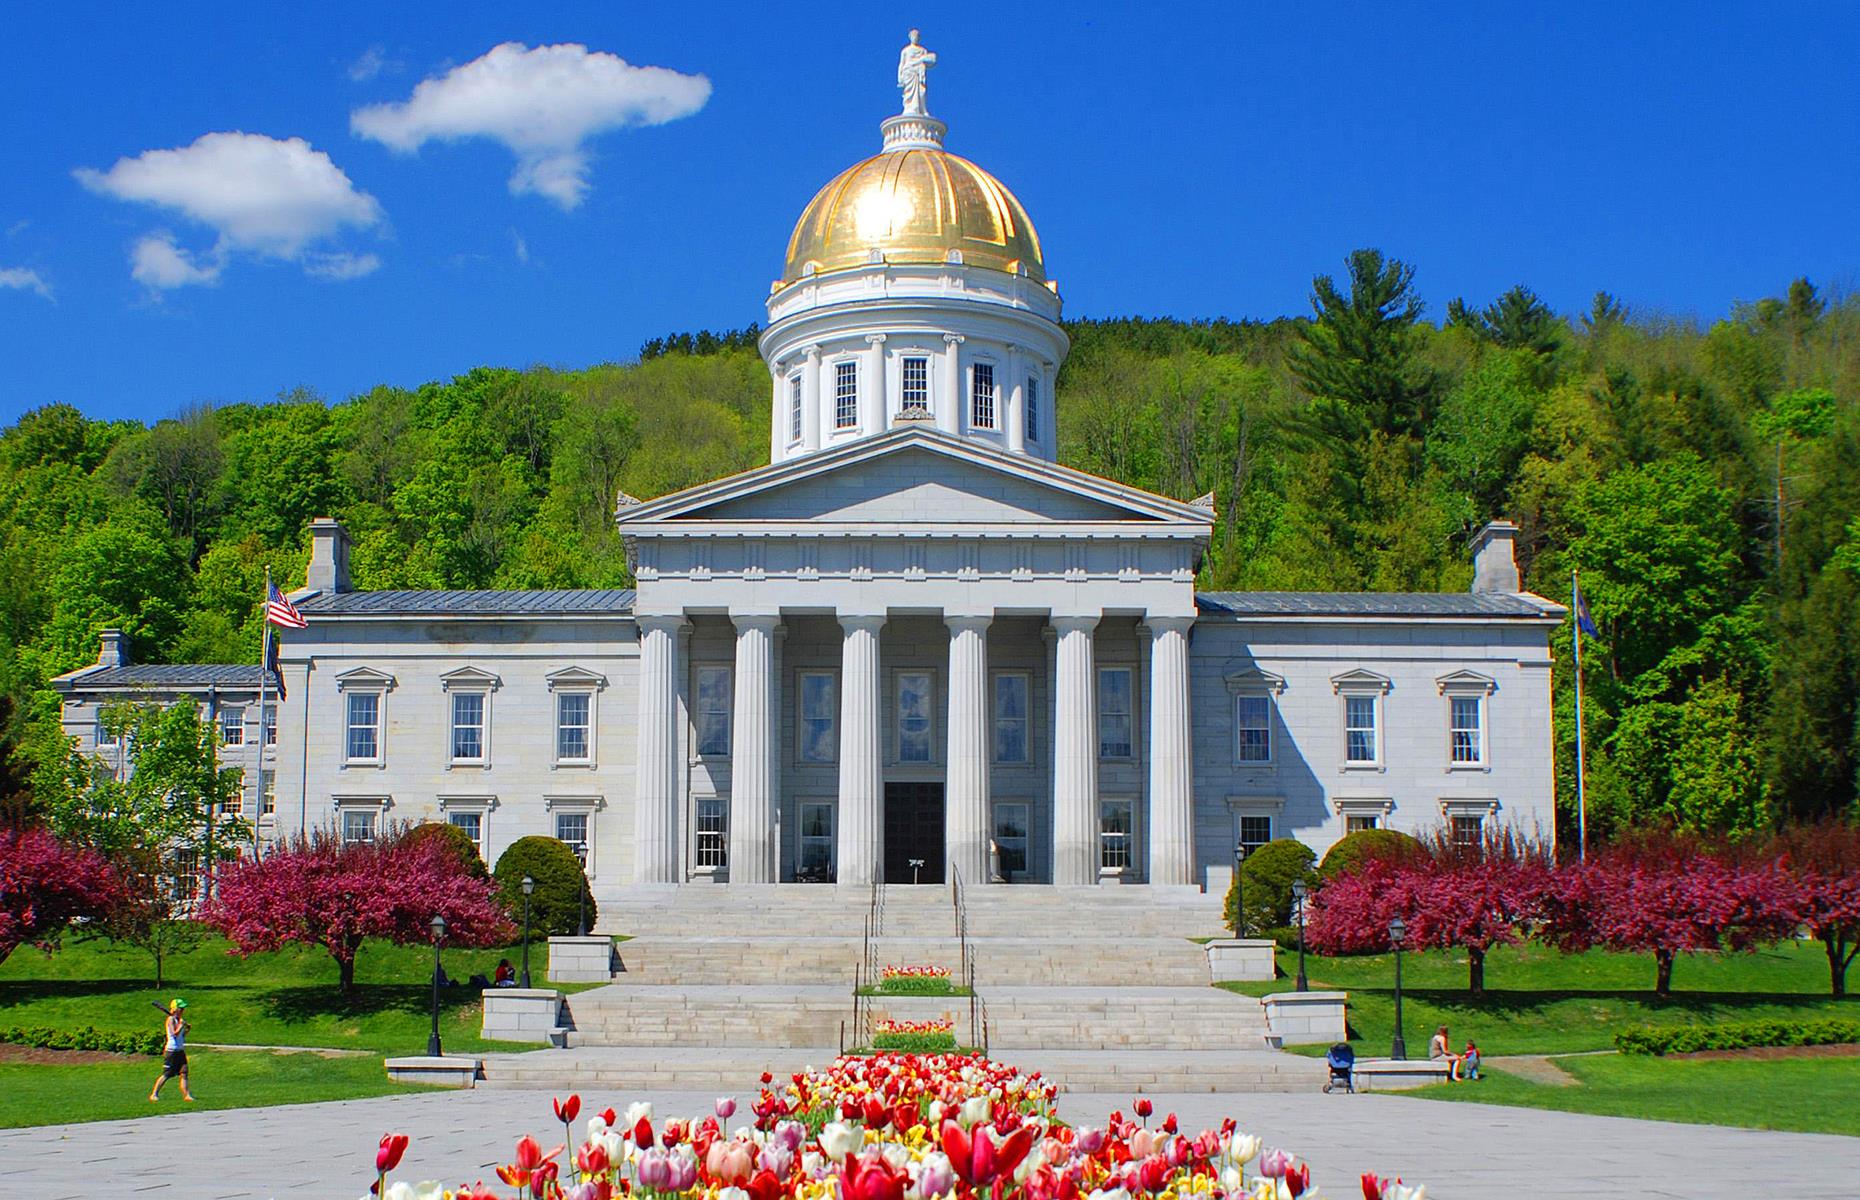 Home of the Vermont General Assembly, the state's legislative body, the State House is a beautiful 1859 Greek Revival building. Its most noticeable feature is, of course, the gold leaf dome, sparkling in front of the leafy trees that are verdant in summer and burgundy in the fall. Guided tours take visitors through the House and Senate chambers as well as the governor's office. You'll be able to take in the impressive collection of historic portraits and art displayed throughout the building.